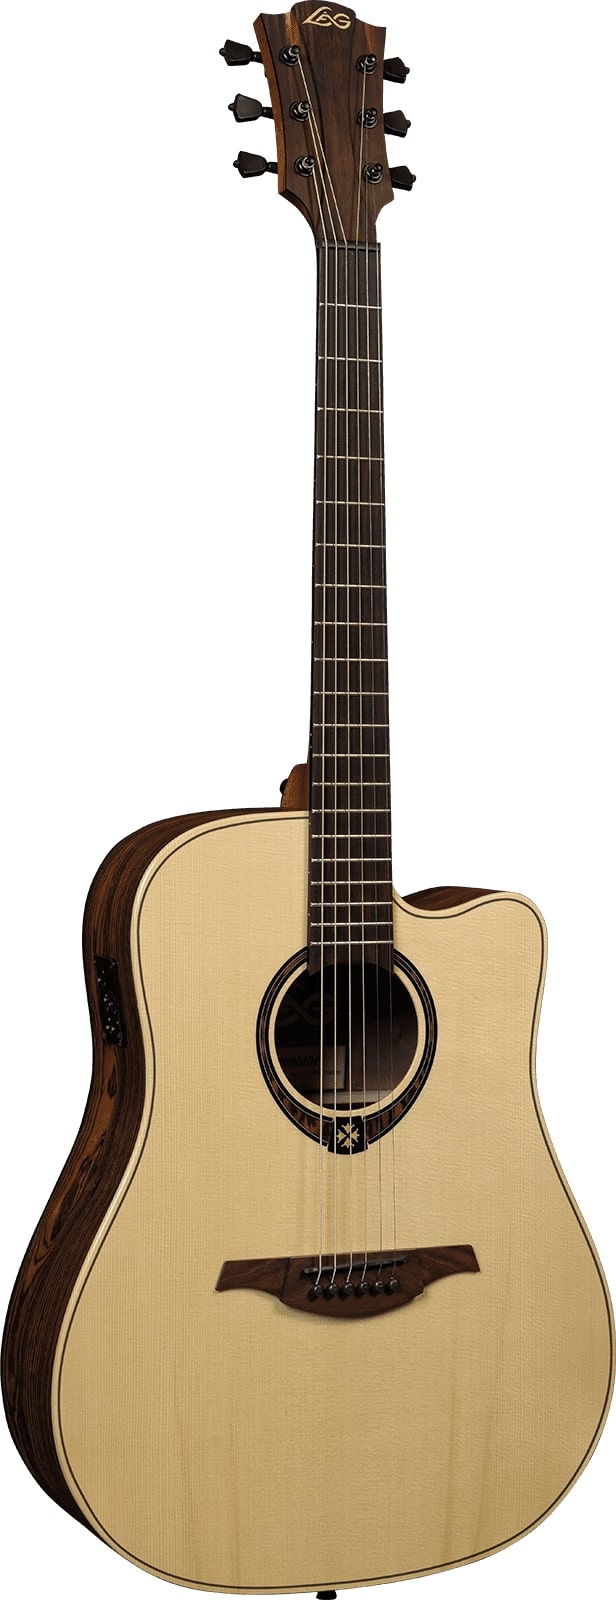 Lag T270DCE Tramontane Dreadnought Cutaway Acoustic-Electric Guitar